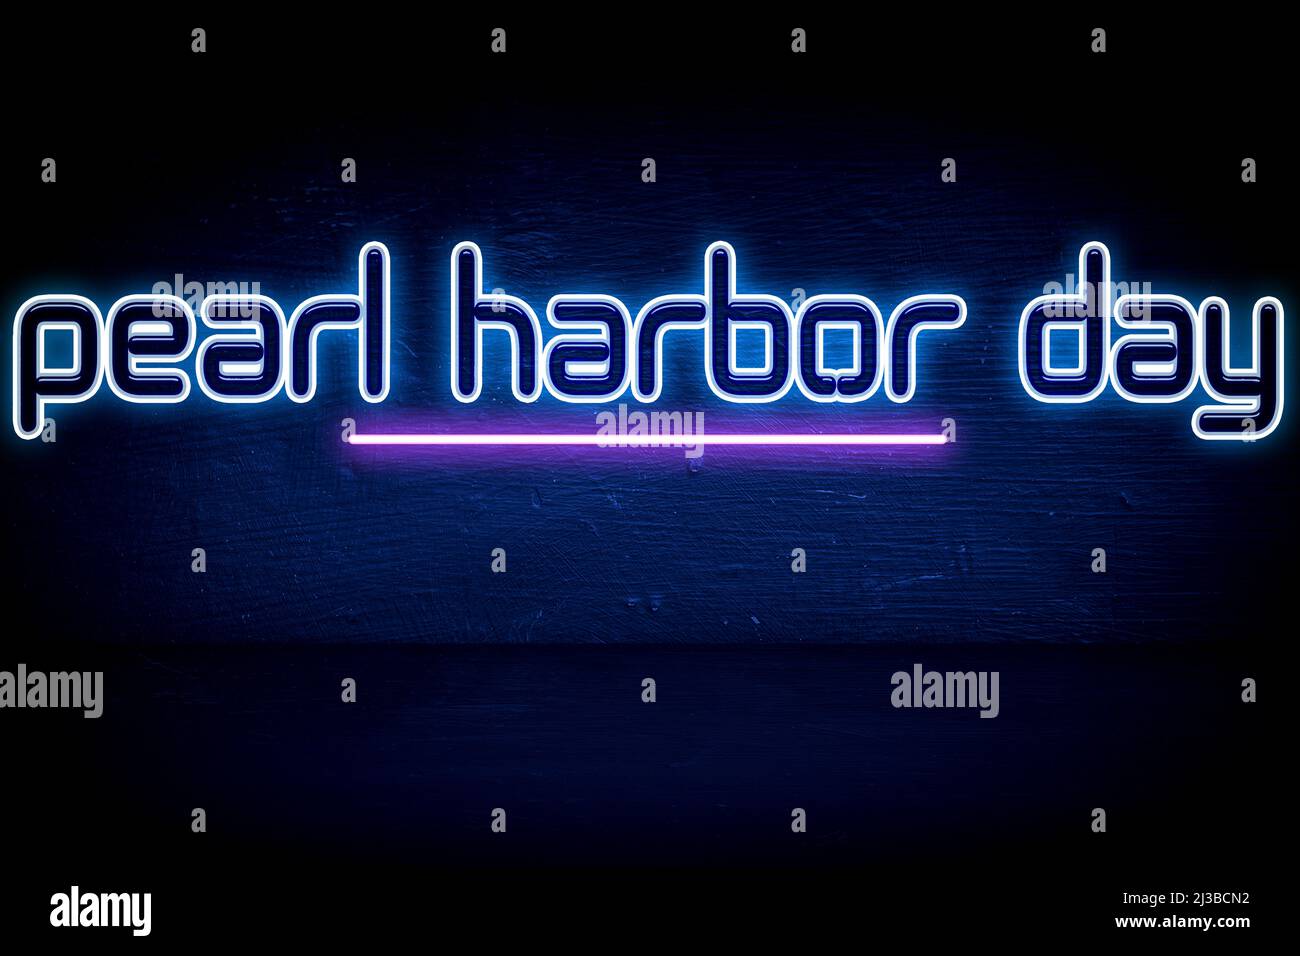 Pearl Harbor Day - blue neon announcement signboard Stock Photo